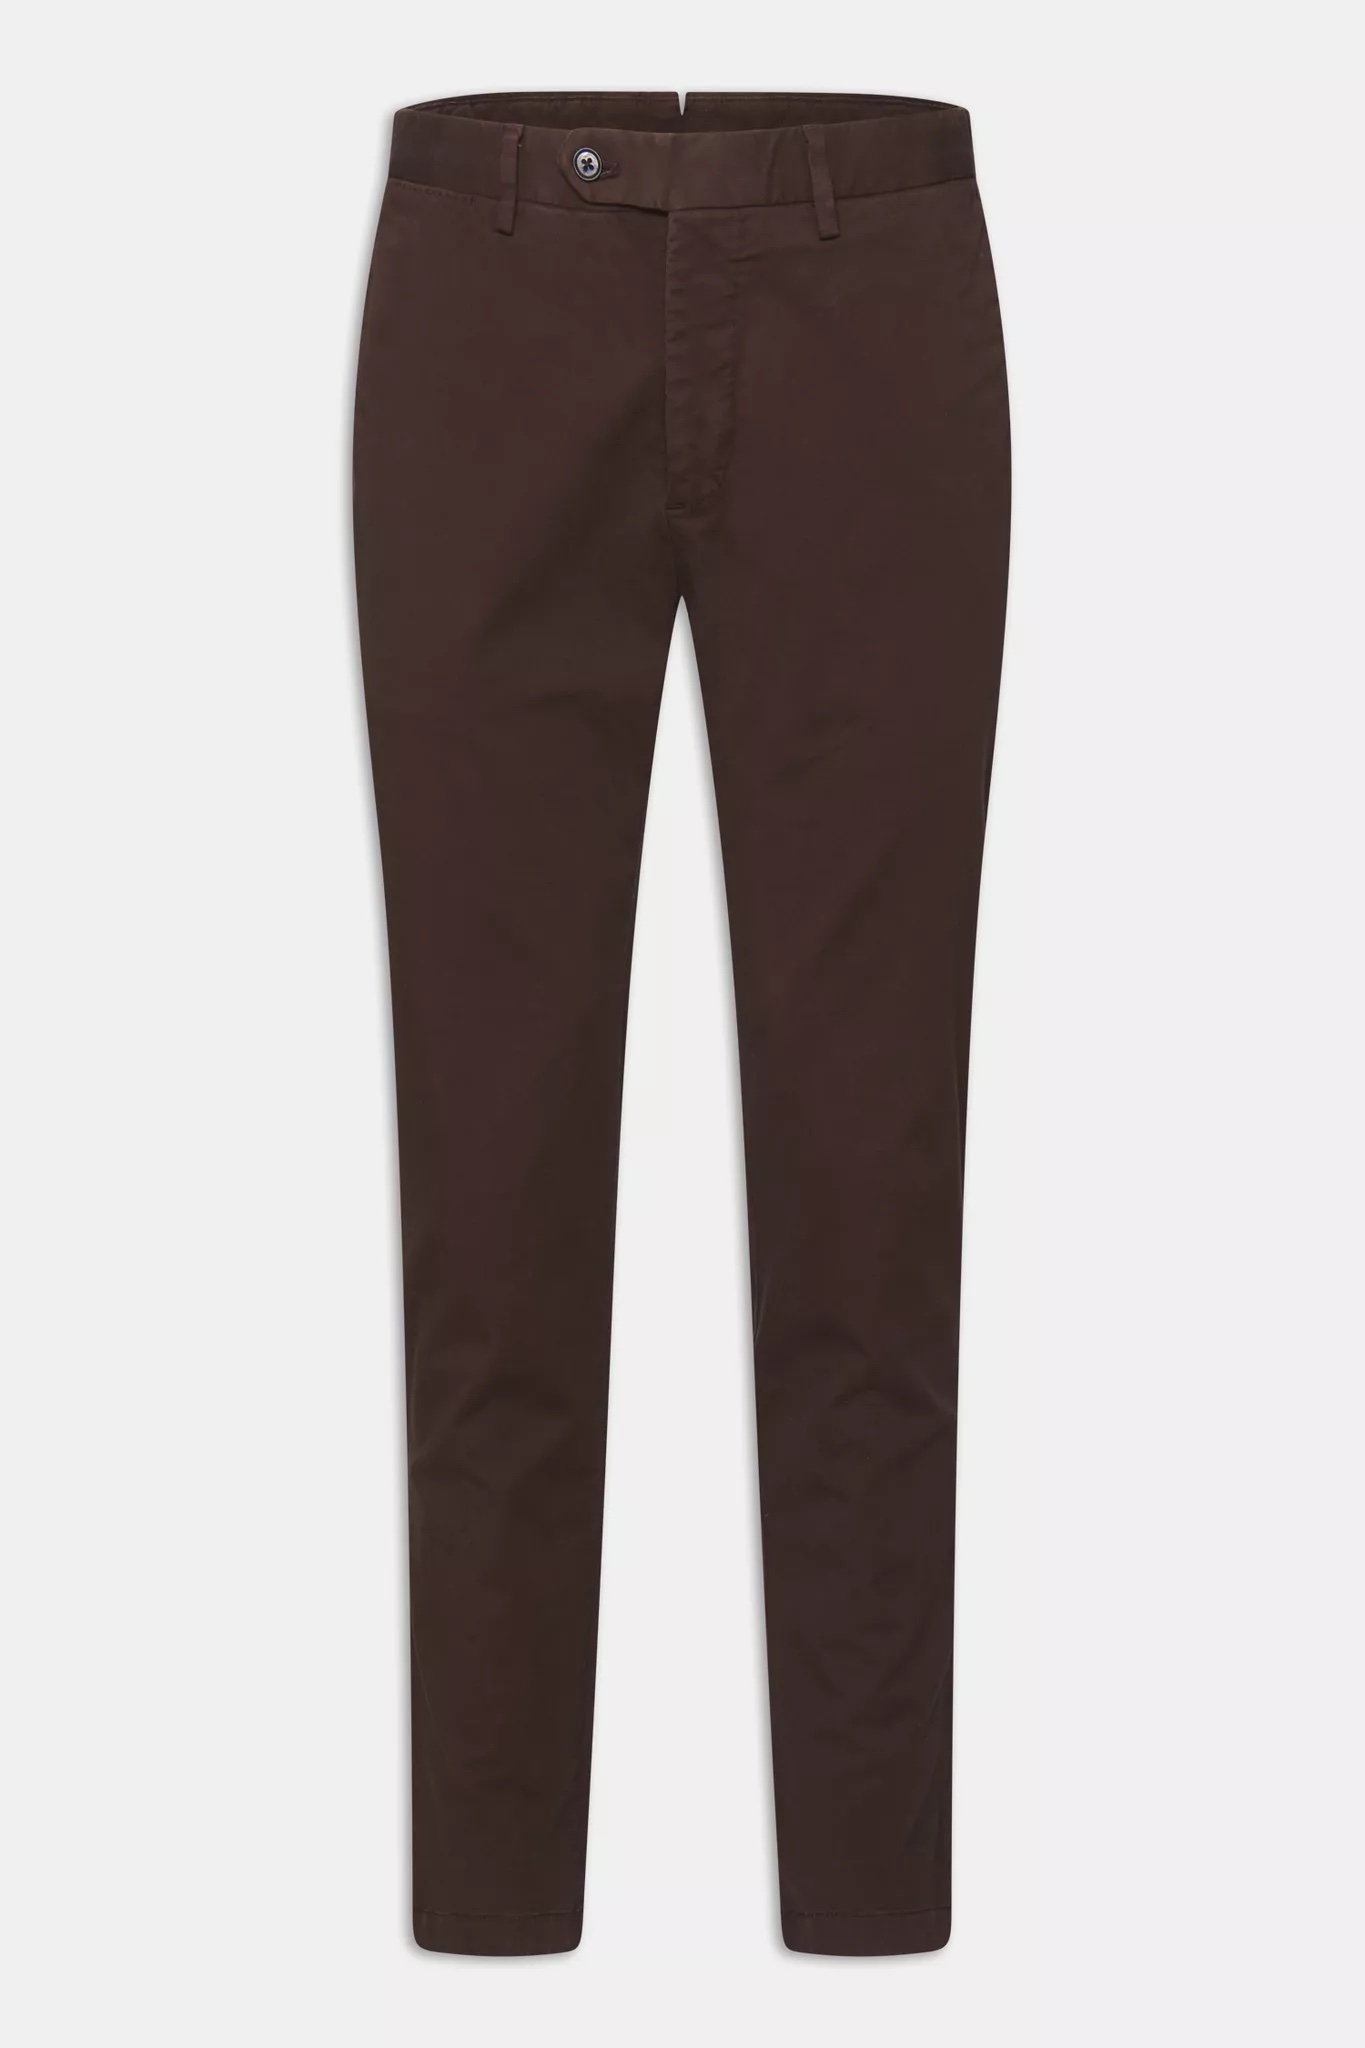 oscar-jacobson_danwick-trousers_red-plum_51764305_602_front